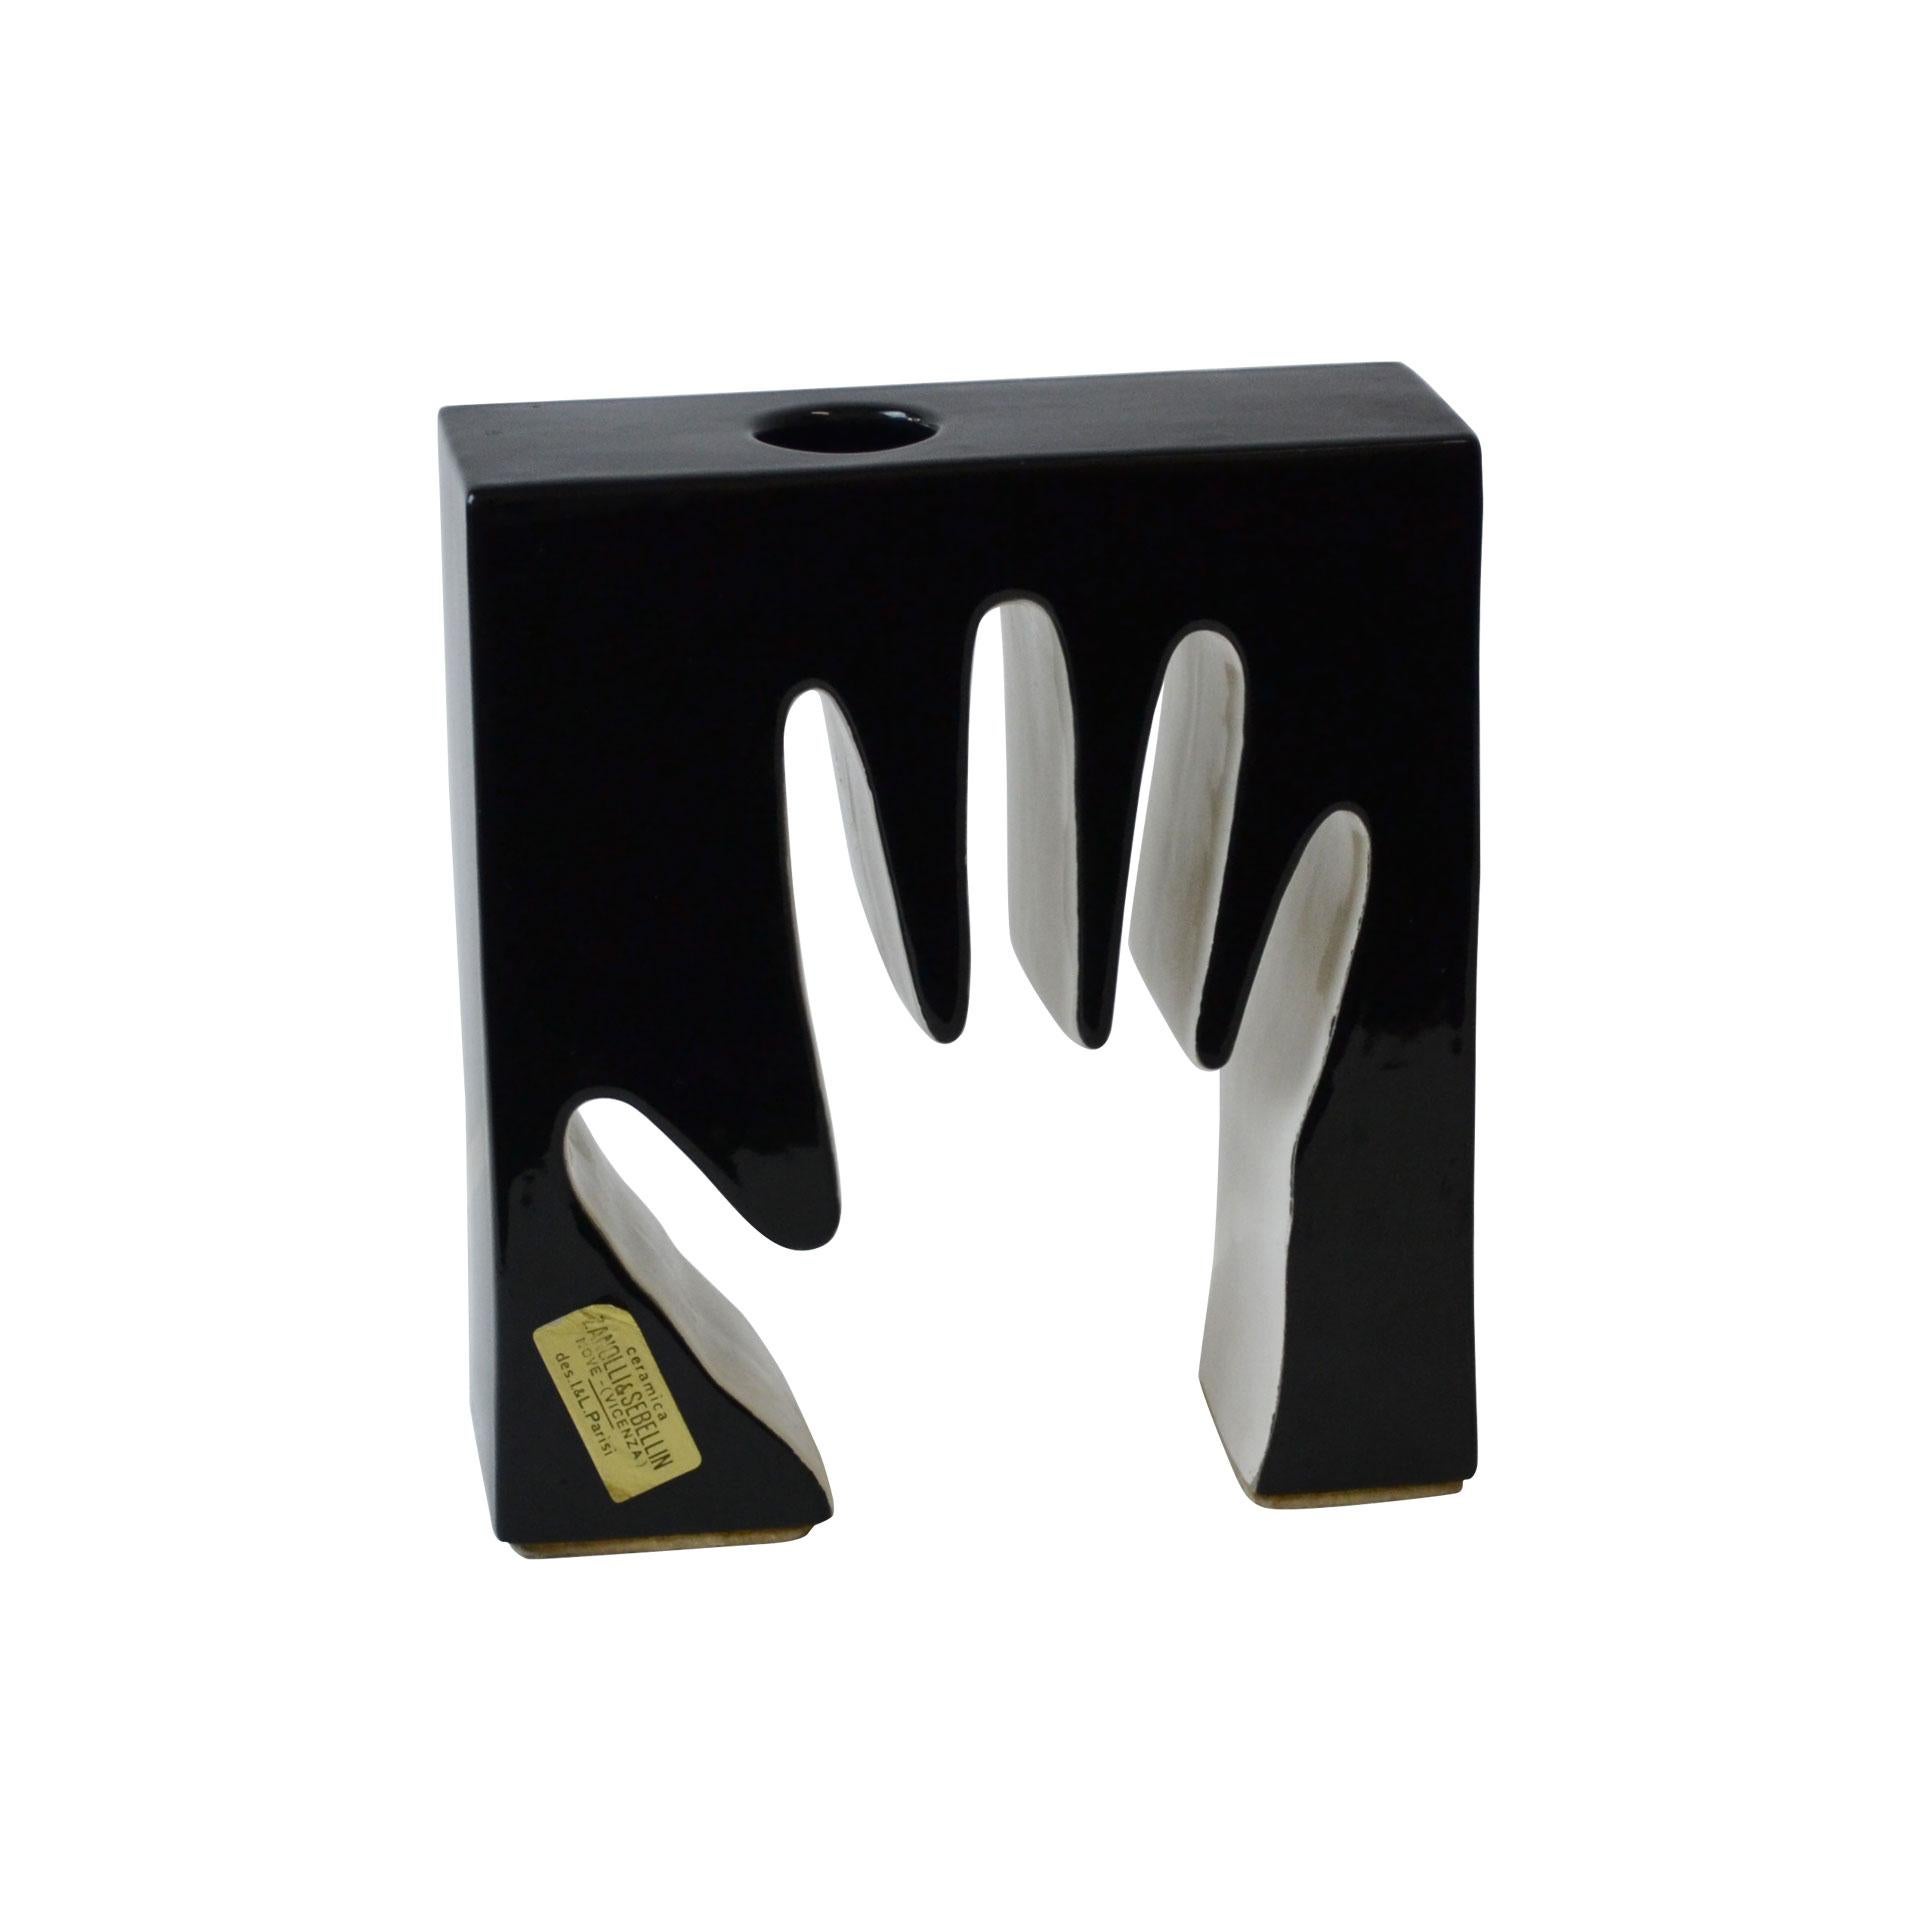 Hand shaped ceramic black and white designed by Ico Parisi & Luisa Parisi in 1966 for Zanolly & Sebellin. The ceramic still carries the brand of the manufacturer. Entirely in glazed ceramic. Very good condition.